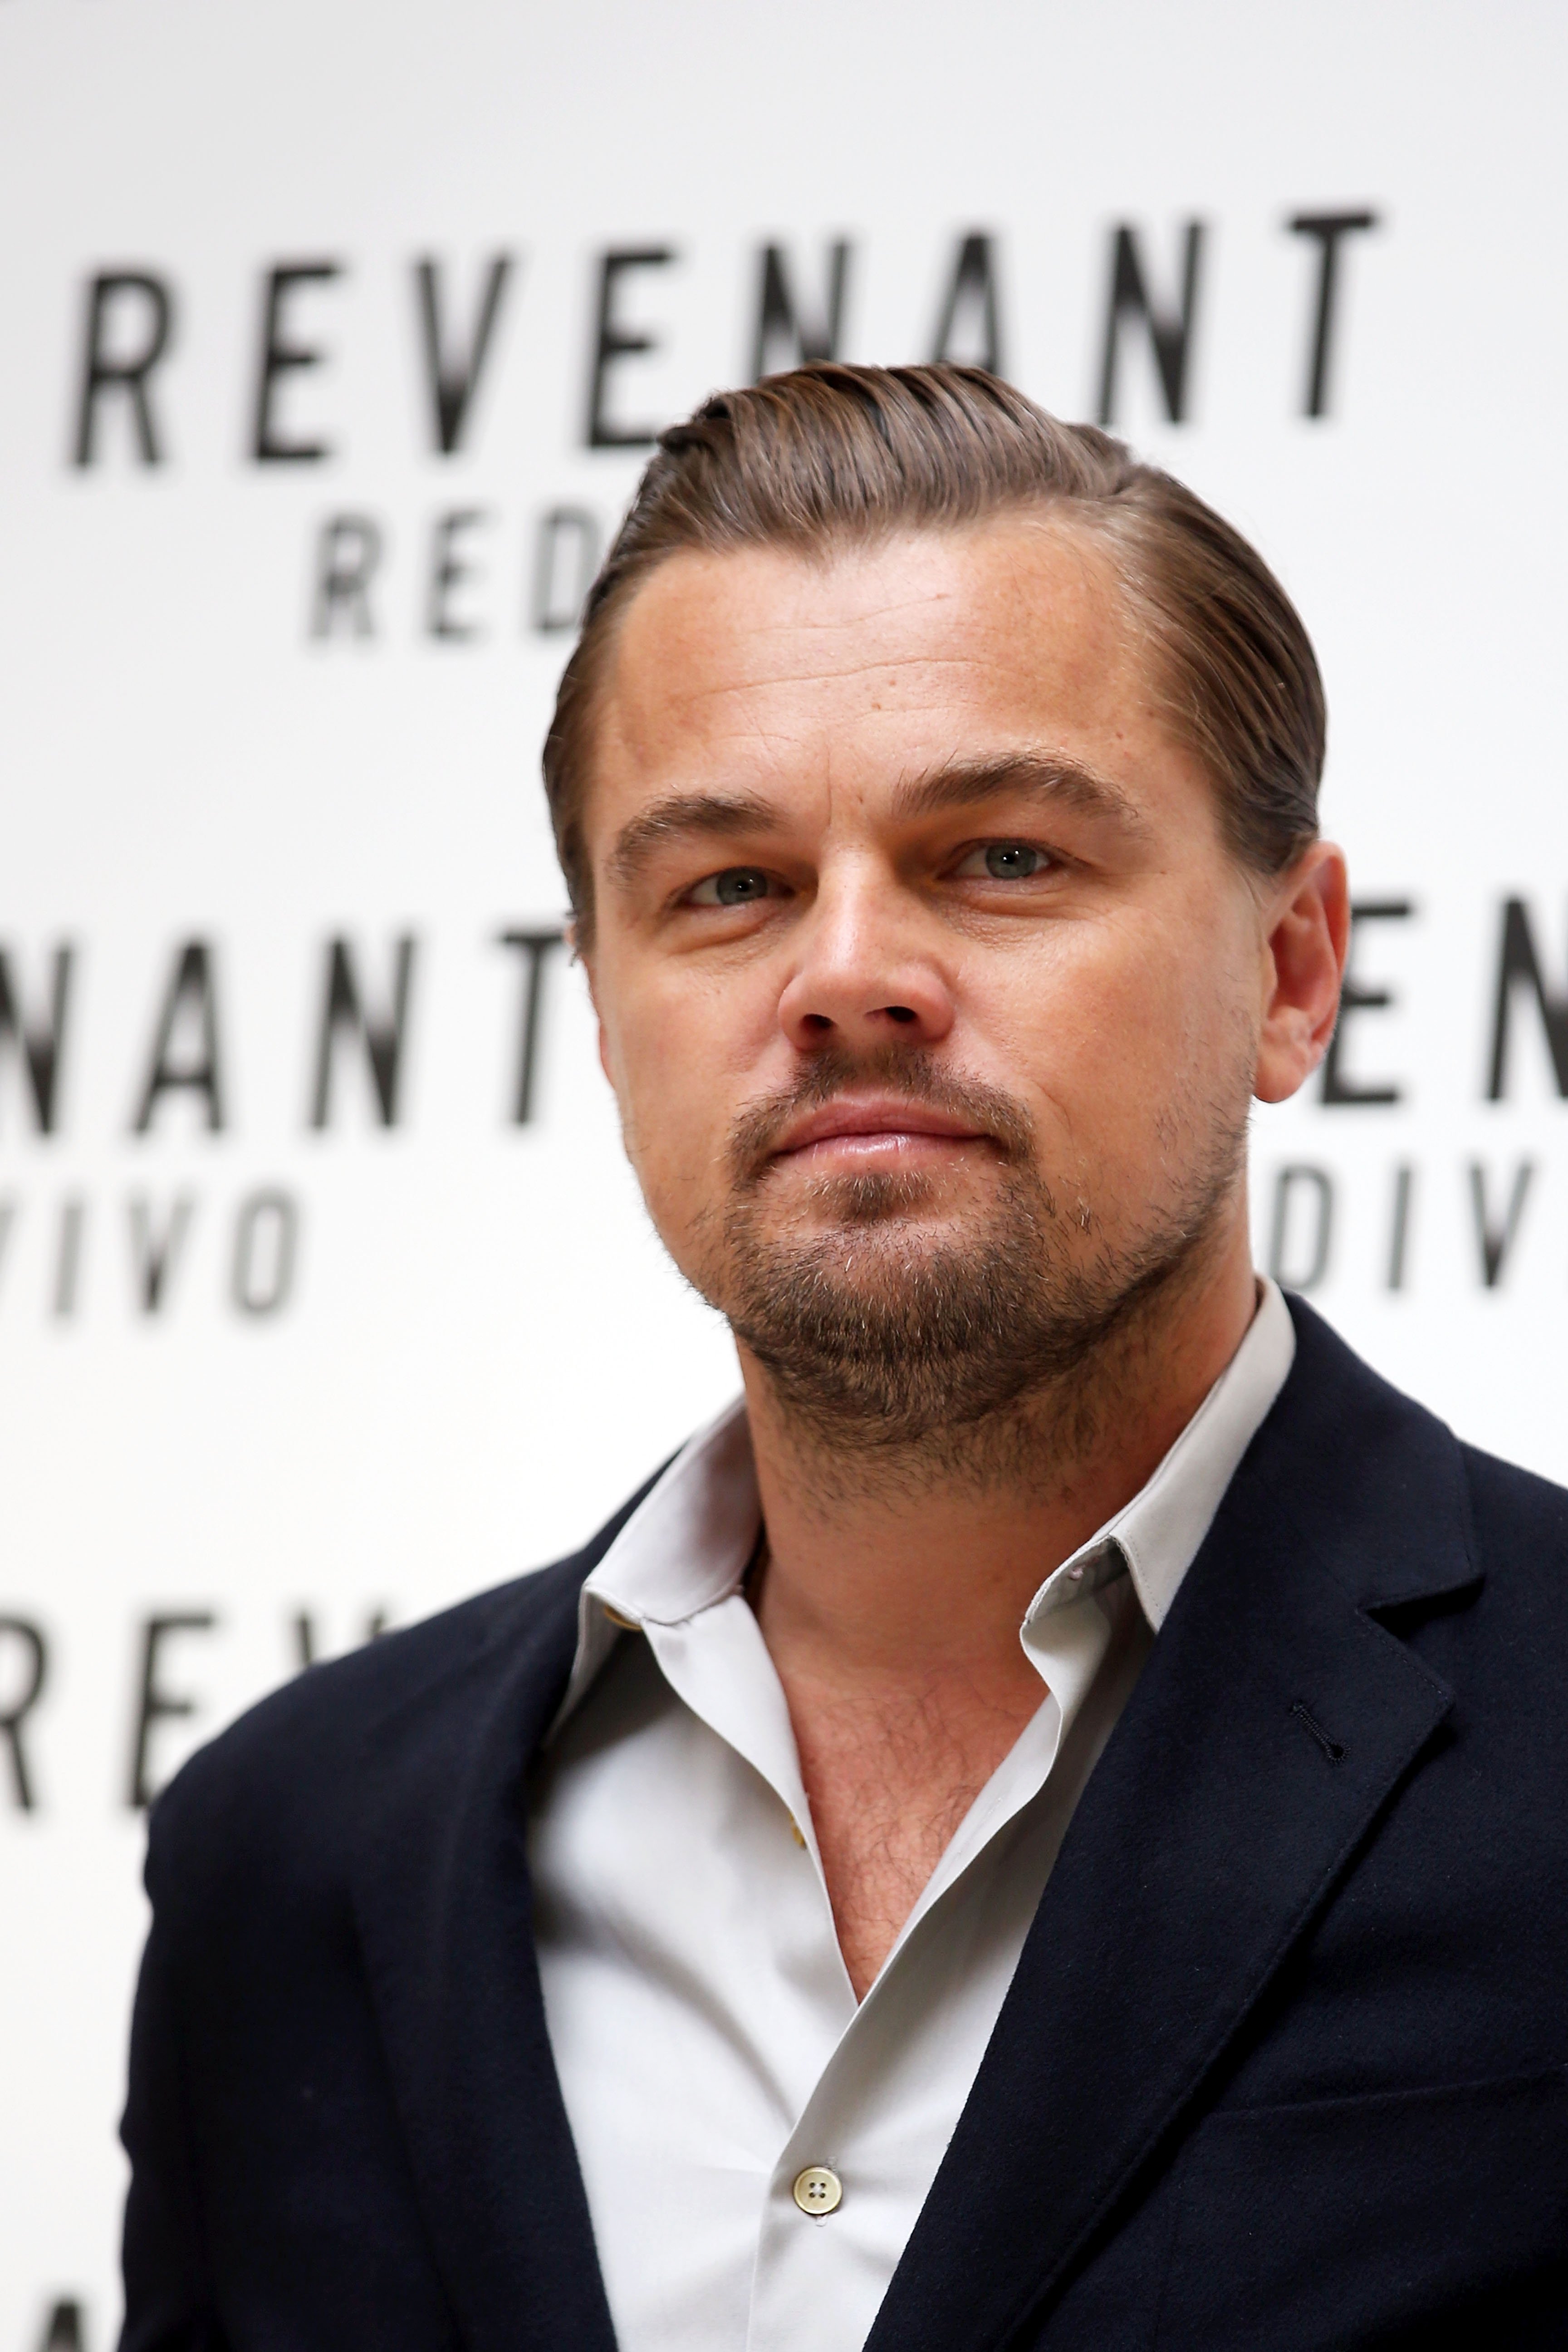 Leonardo DiCaprio attends a photocall for 'The Revenant' on January 16, 2016, in Rome, Italy. | Source: Getty Images.